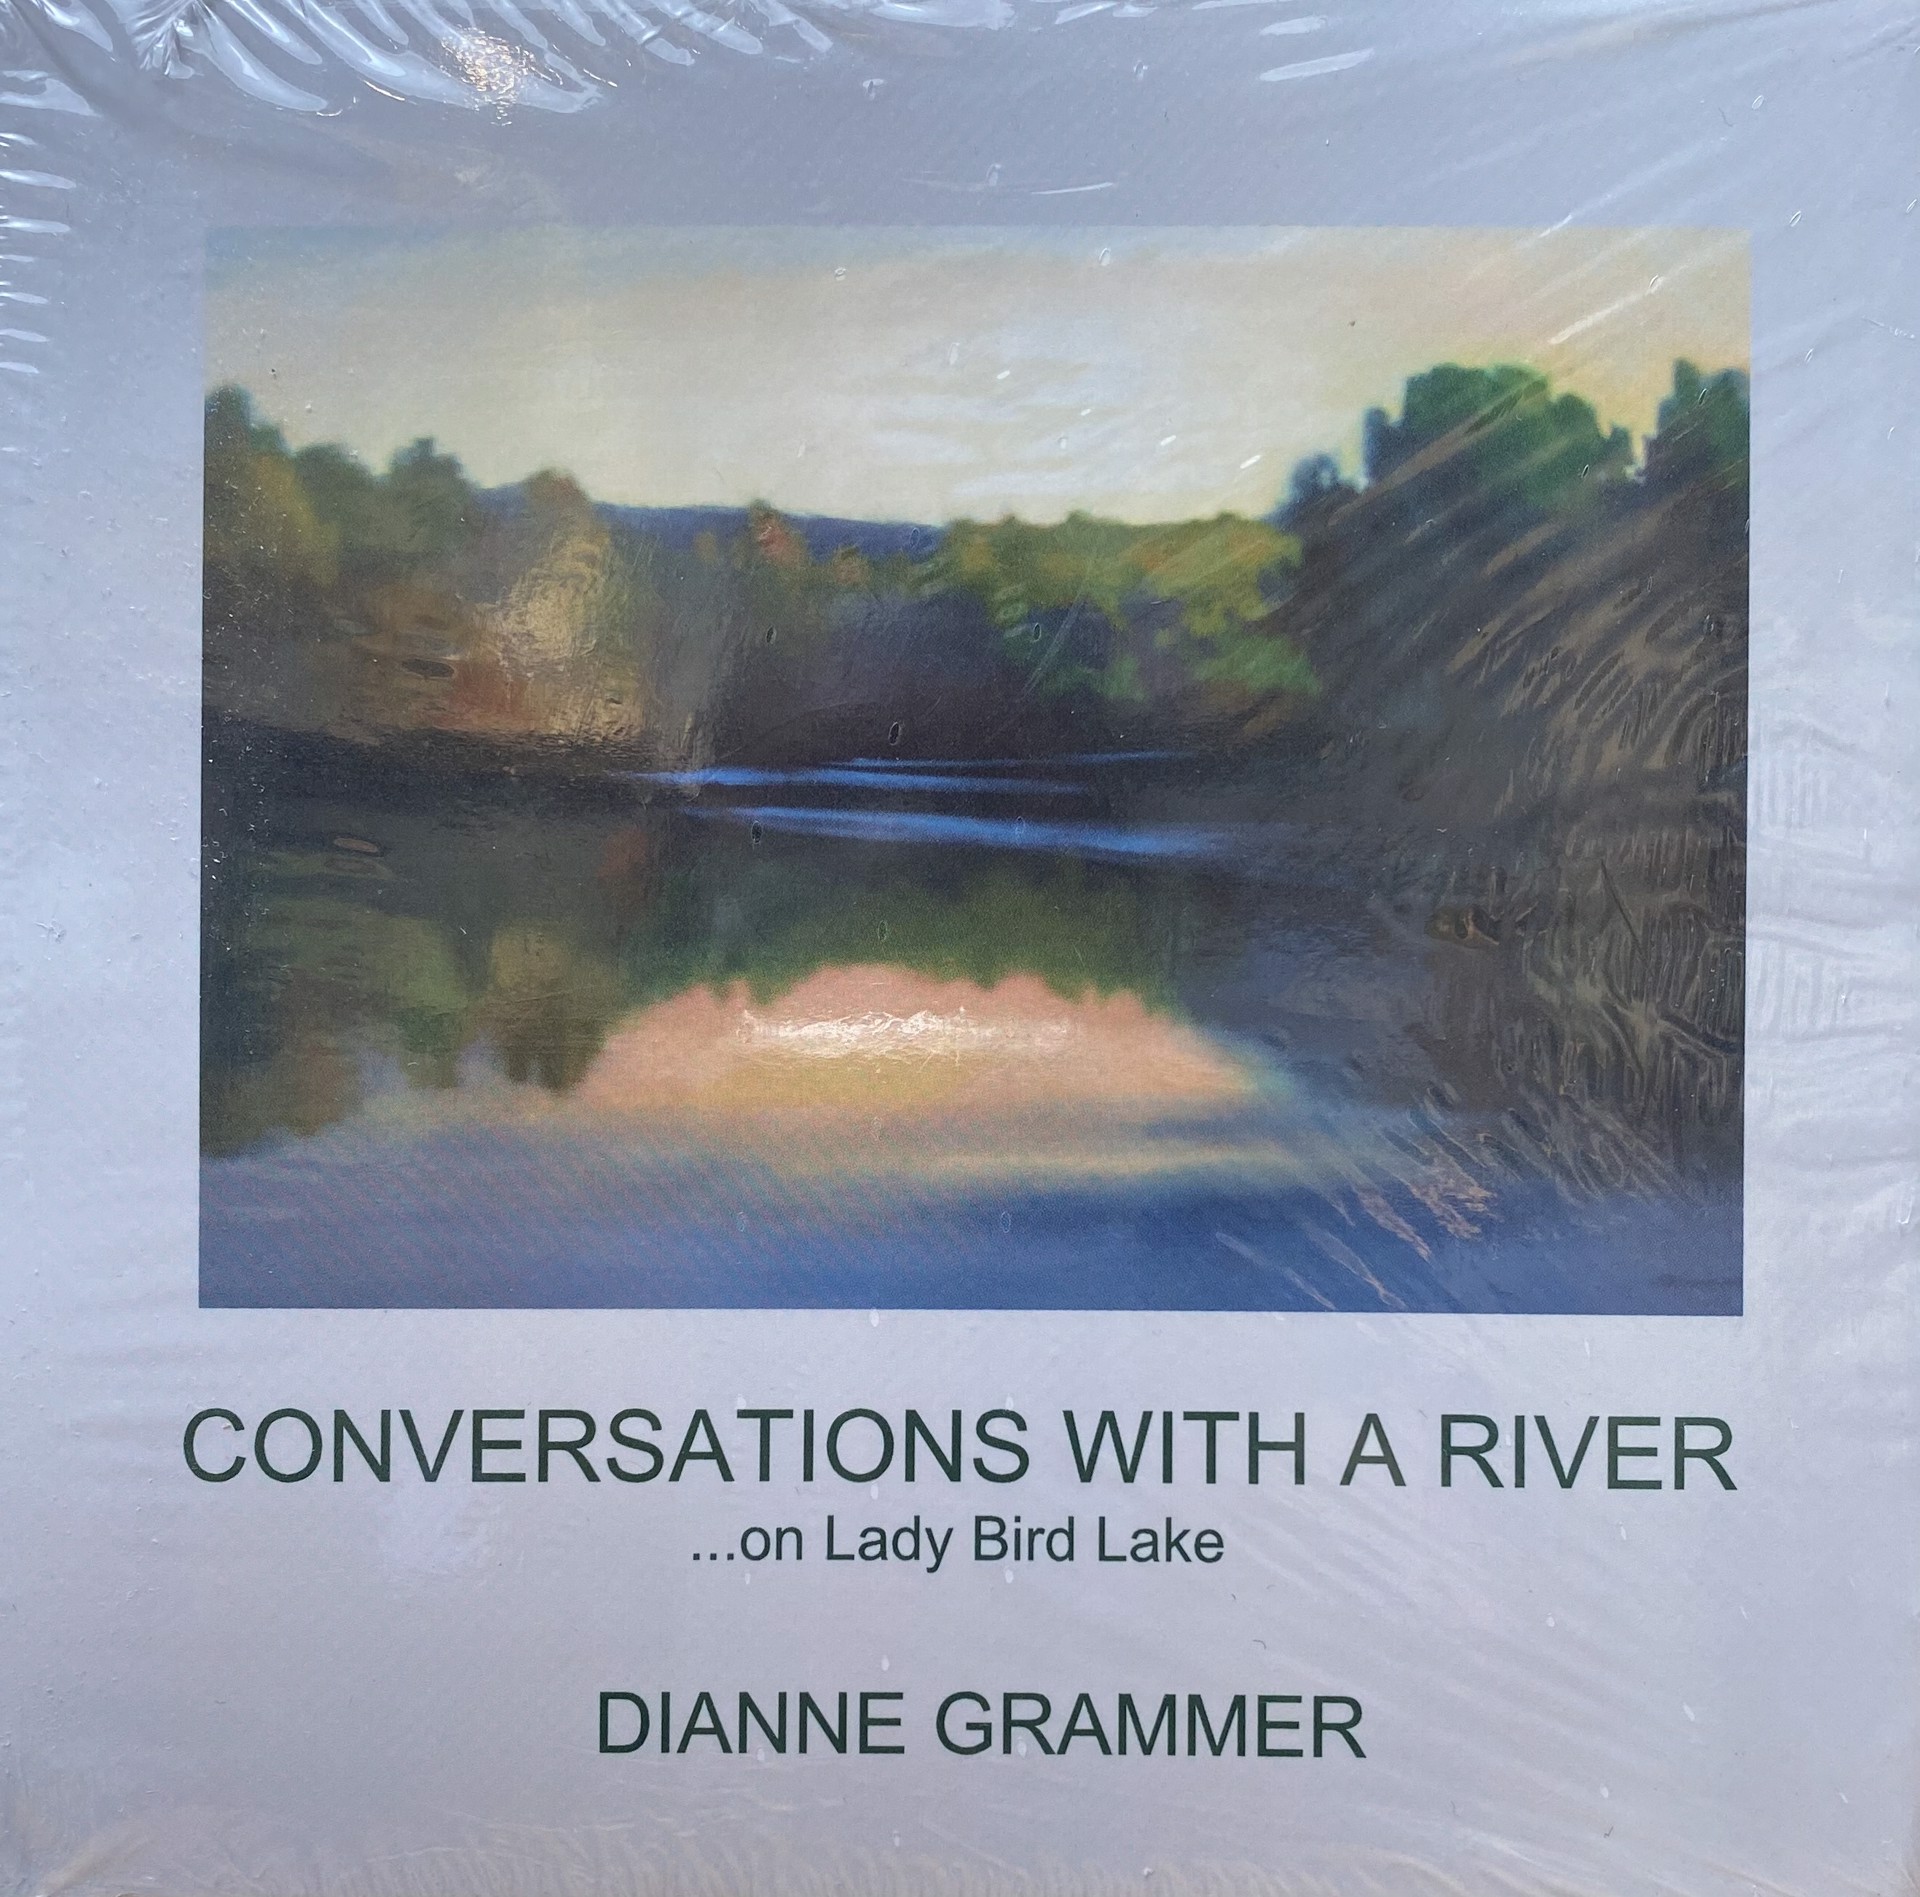 Dianne Grammer: Conversations with a River... (HC; 12/18) by Dianne Grammer